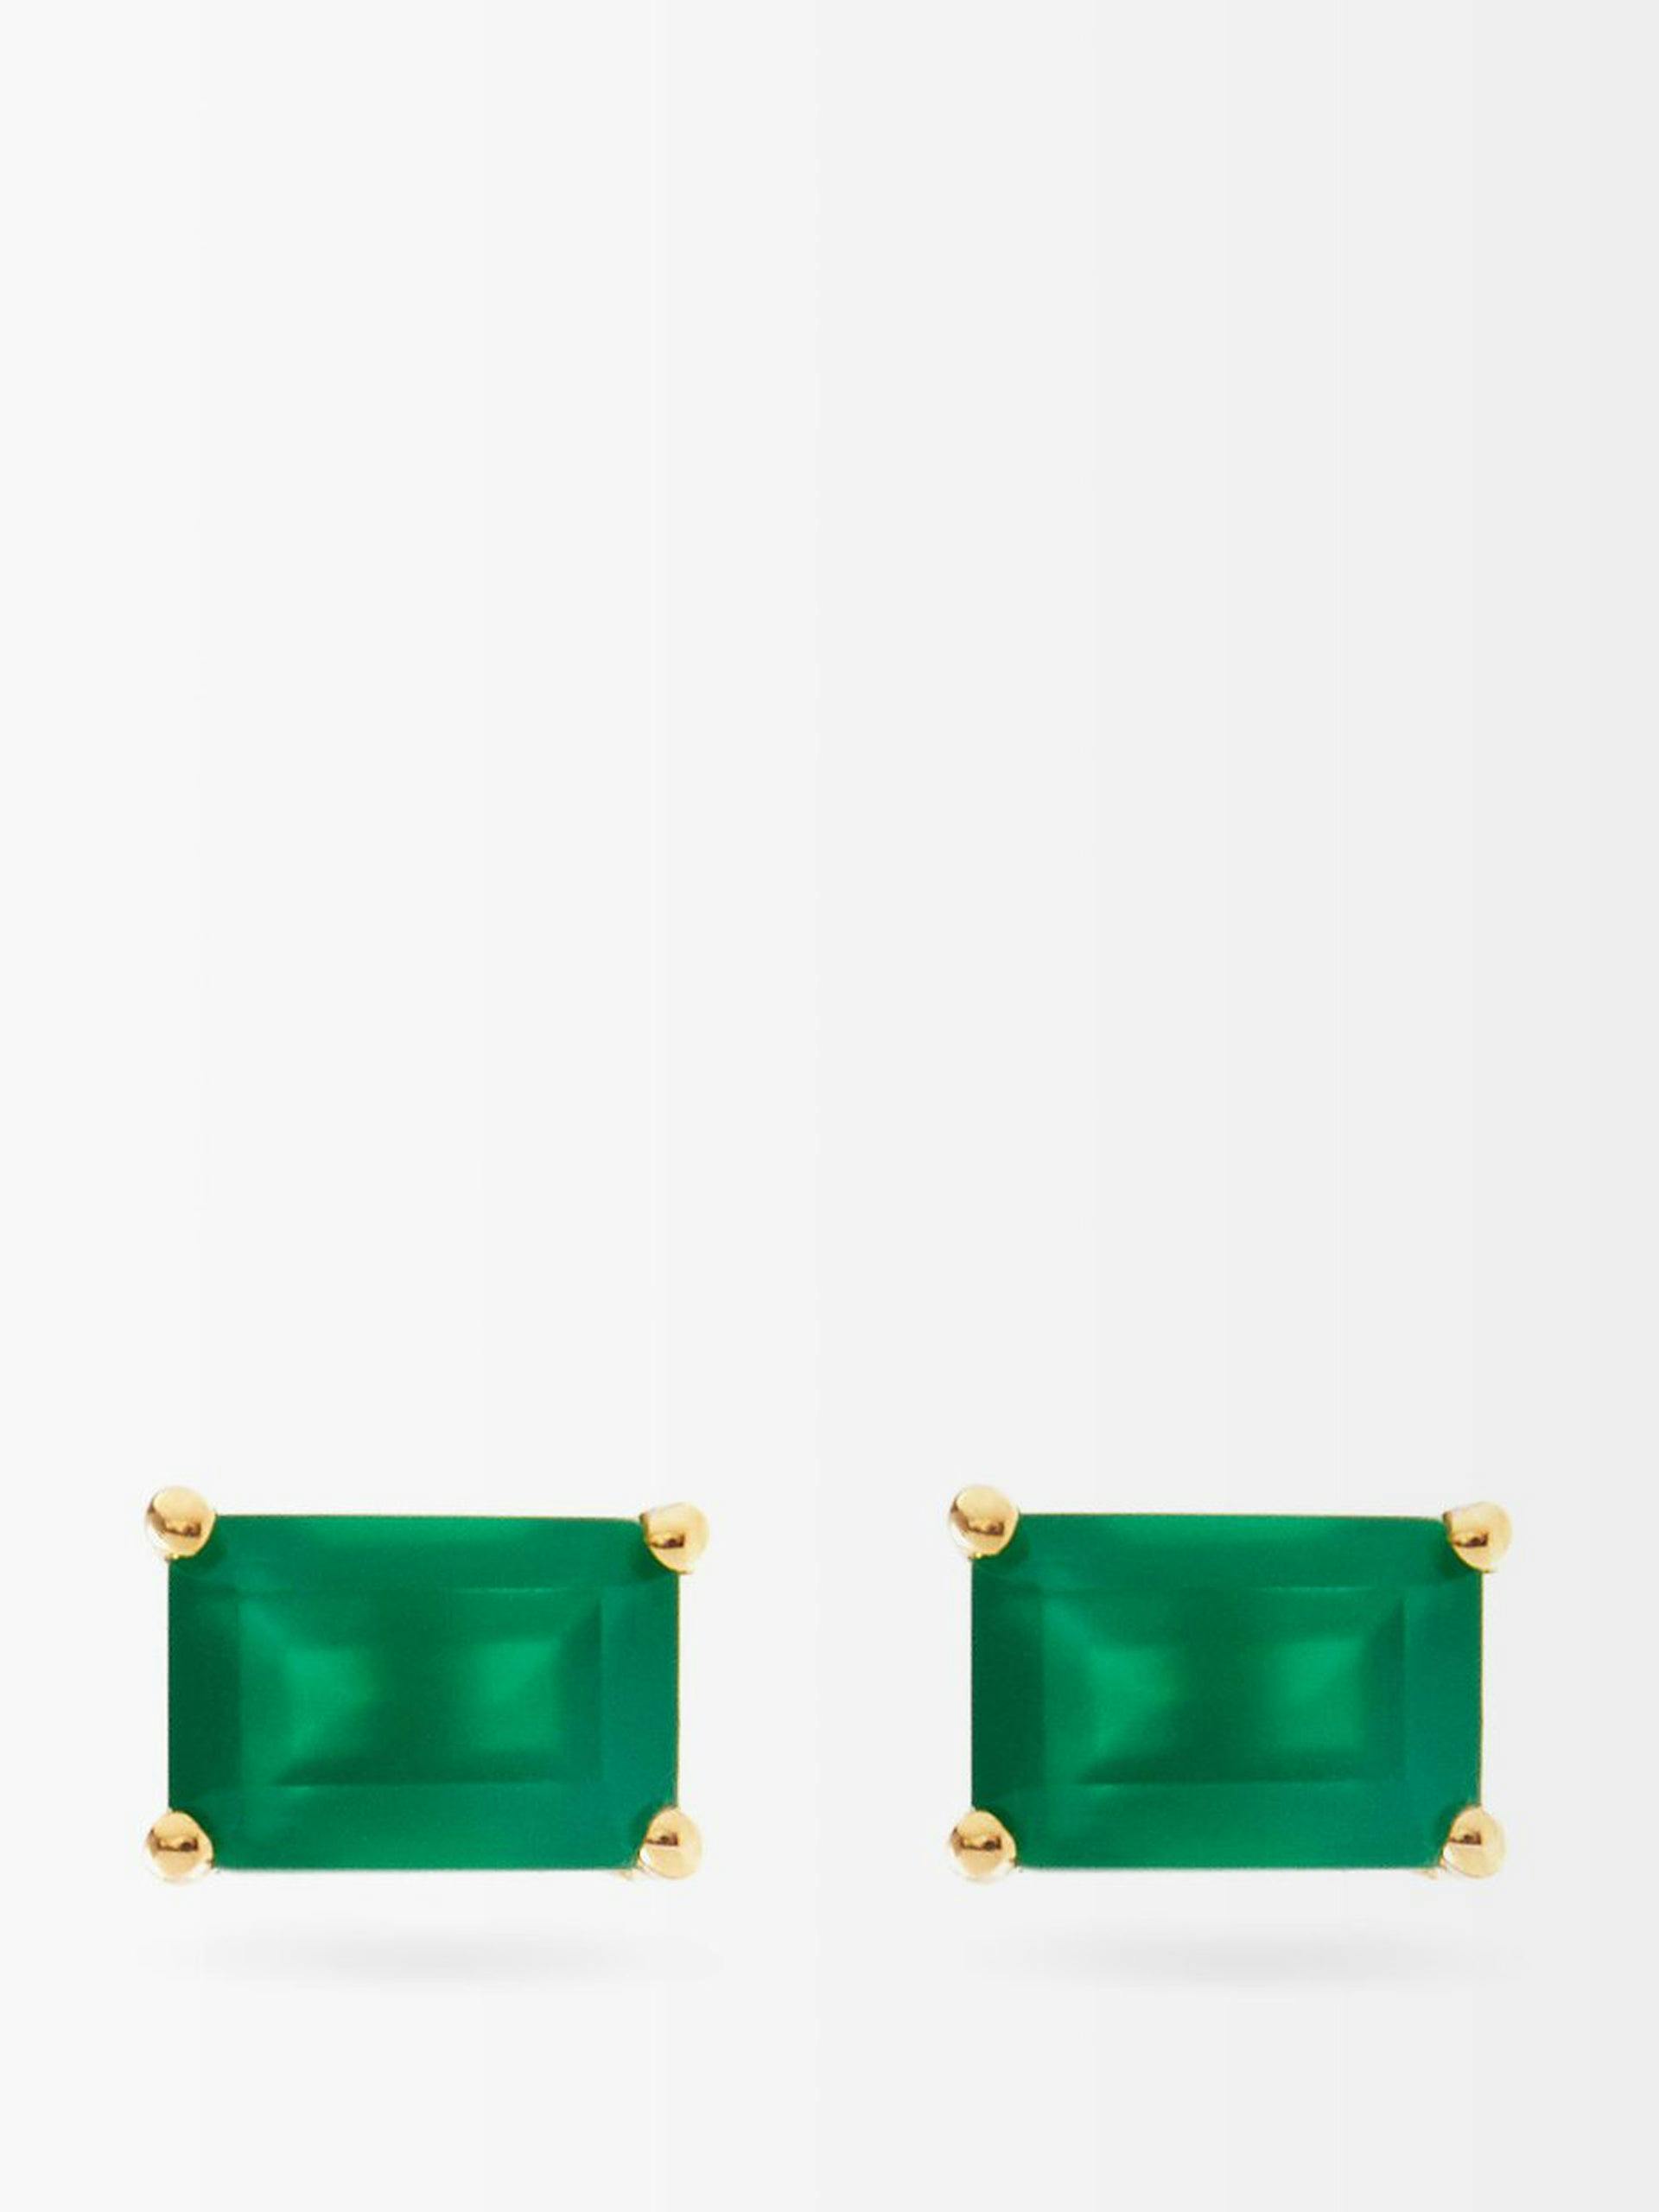 Green onyx and 14kt gold stud earrings